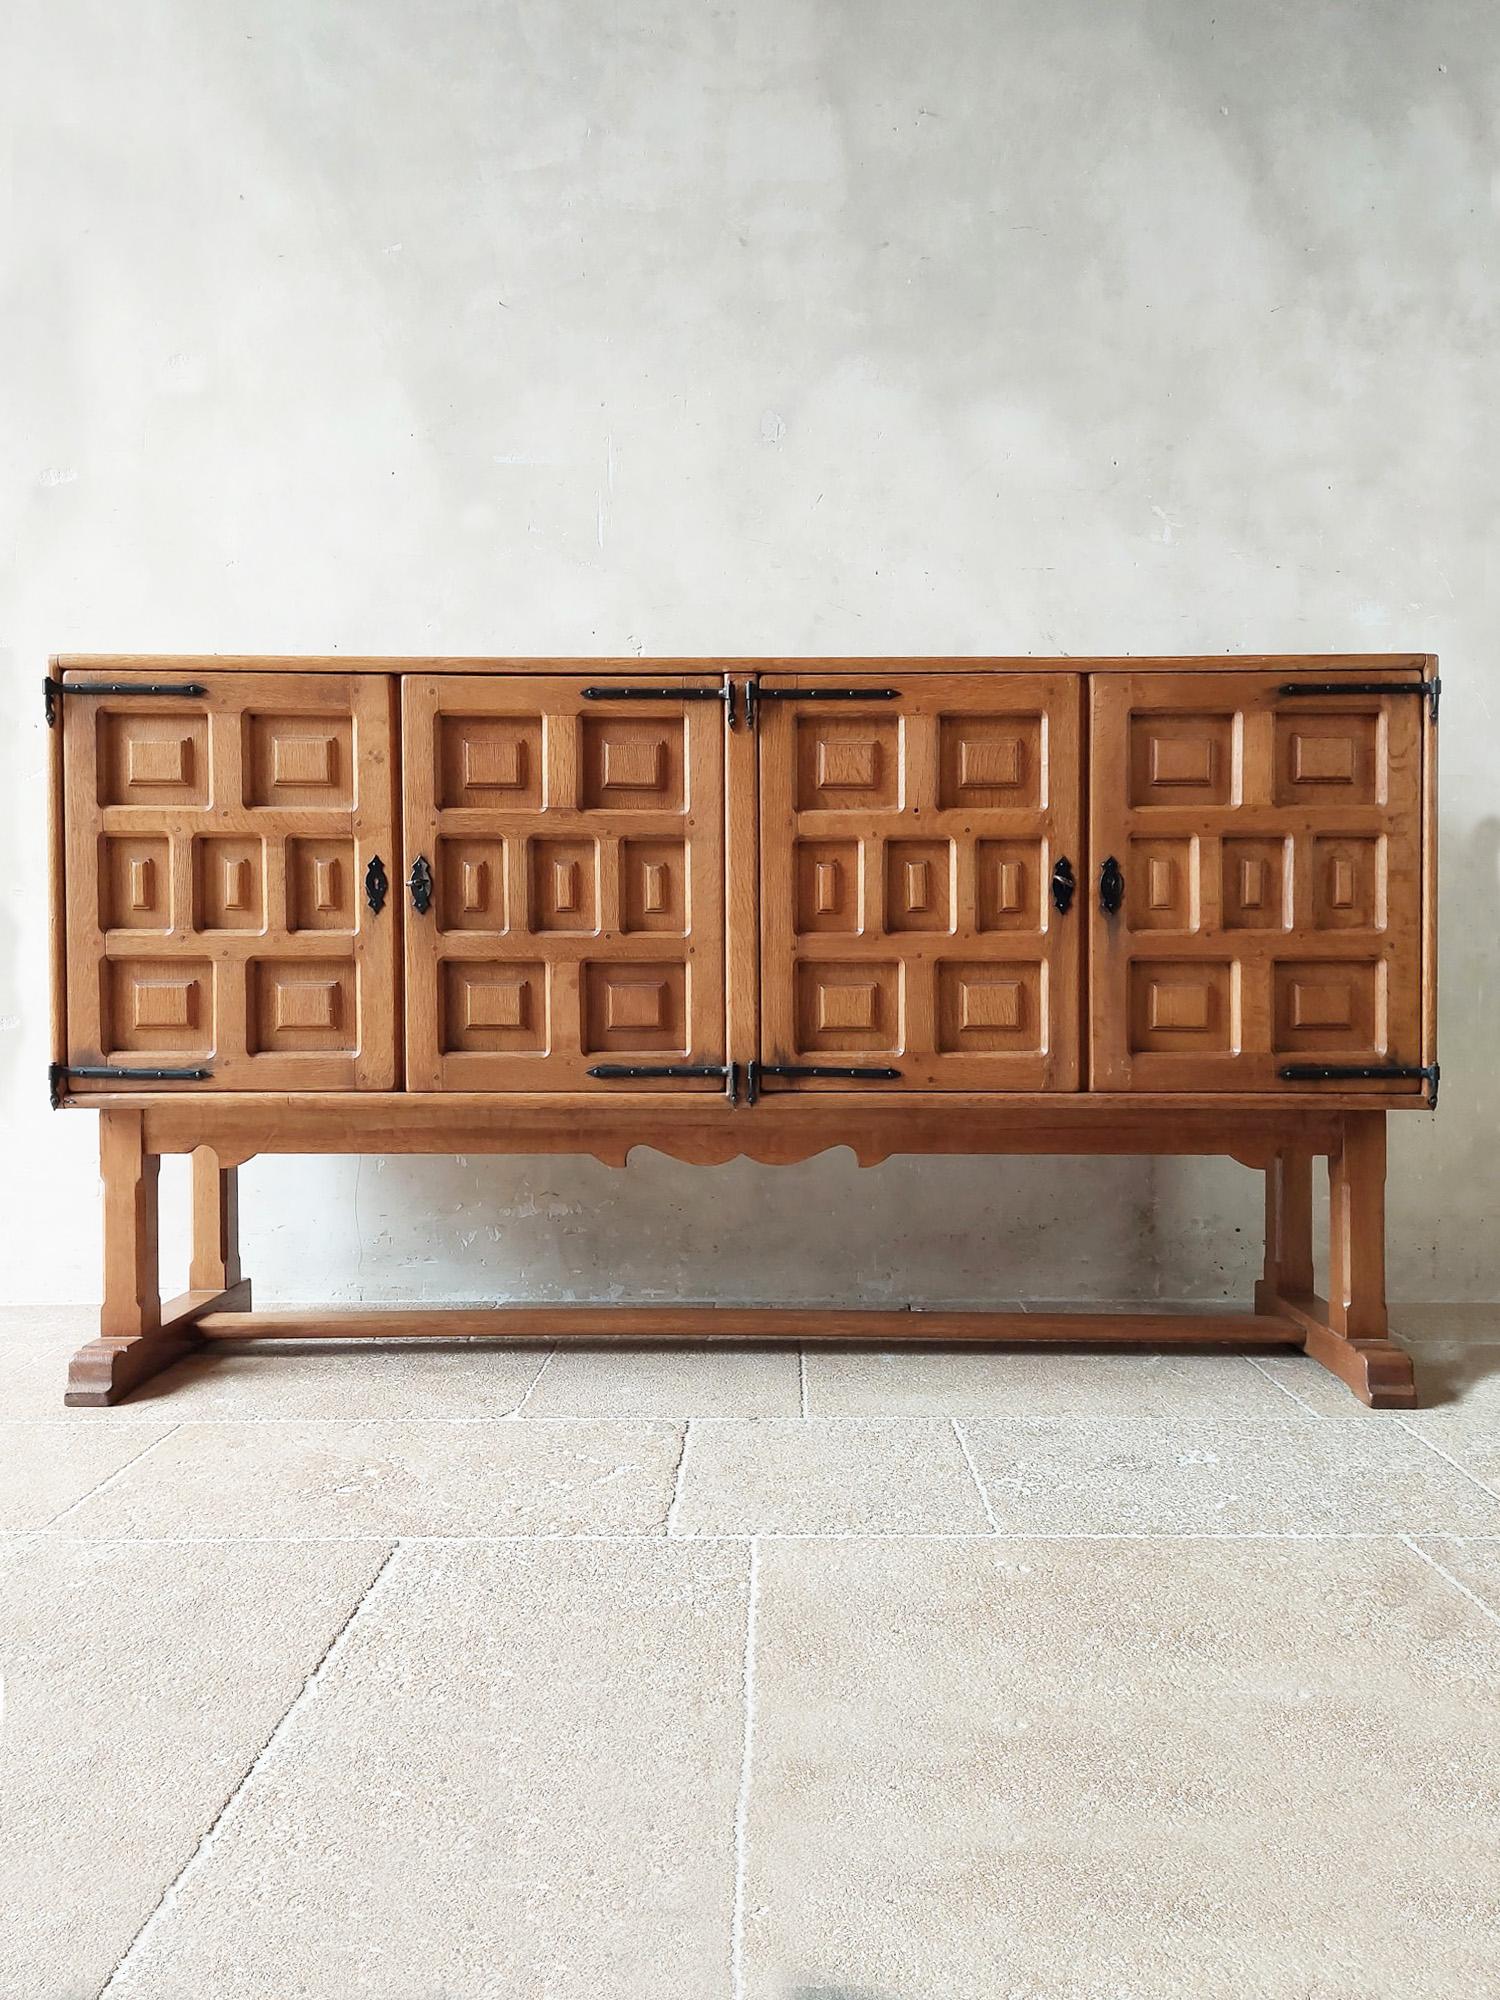 Spanish carved wooden credenza with 4 doors with carved geometrical shapes, raised on a base. Brutalist style. Early 20th century.

Measures: H 102 x W 200 x D 50 cm.